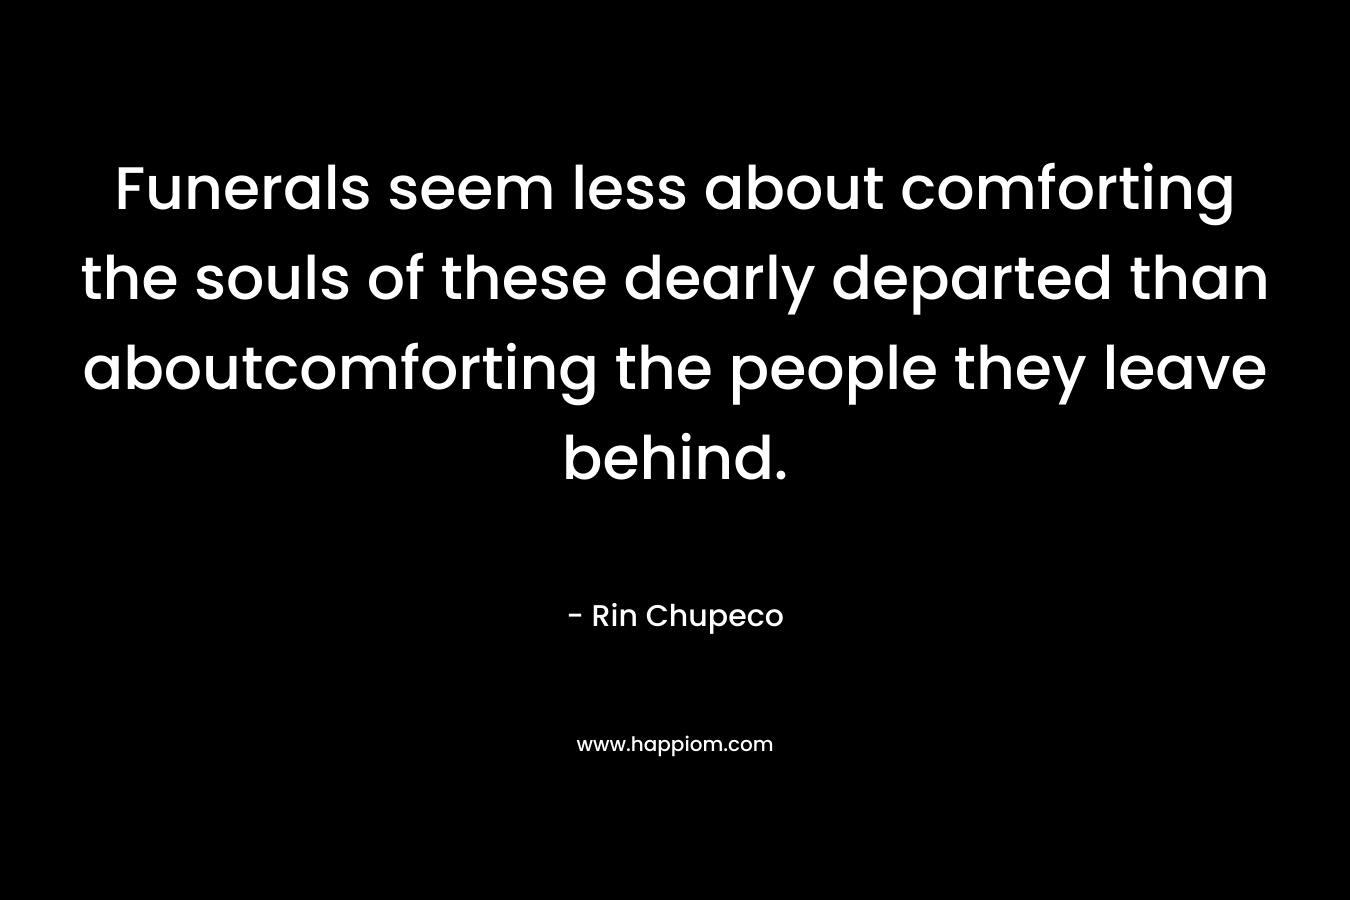 Funerals seem less about comforting the souls of these dearly departed than aboutcomforting the people they leave behind. – Rin Chupeco